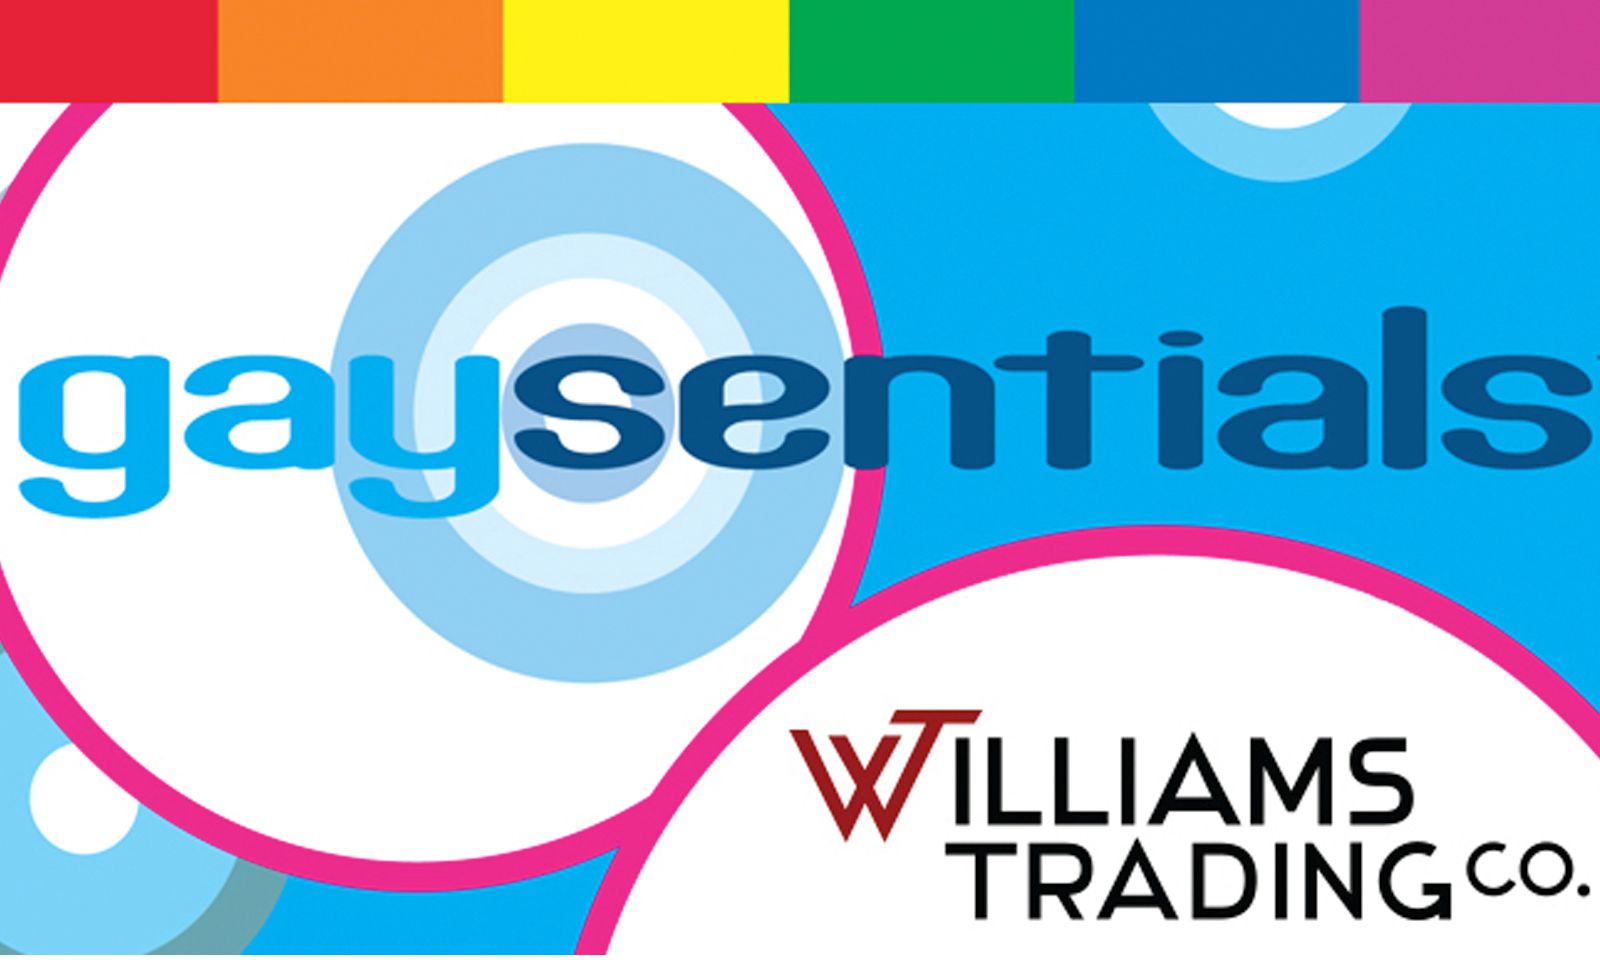 Williams Trading Now Stocking PHS’ Gaysentials Pride Collection